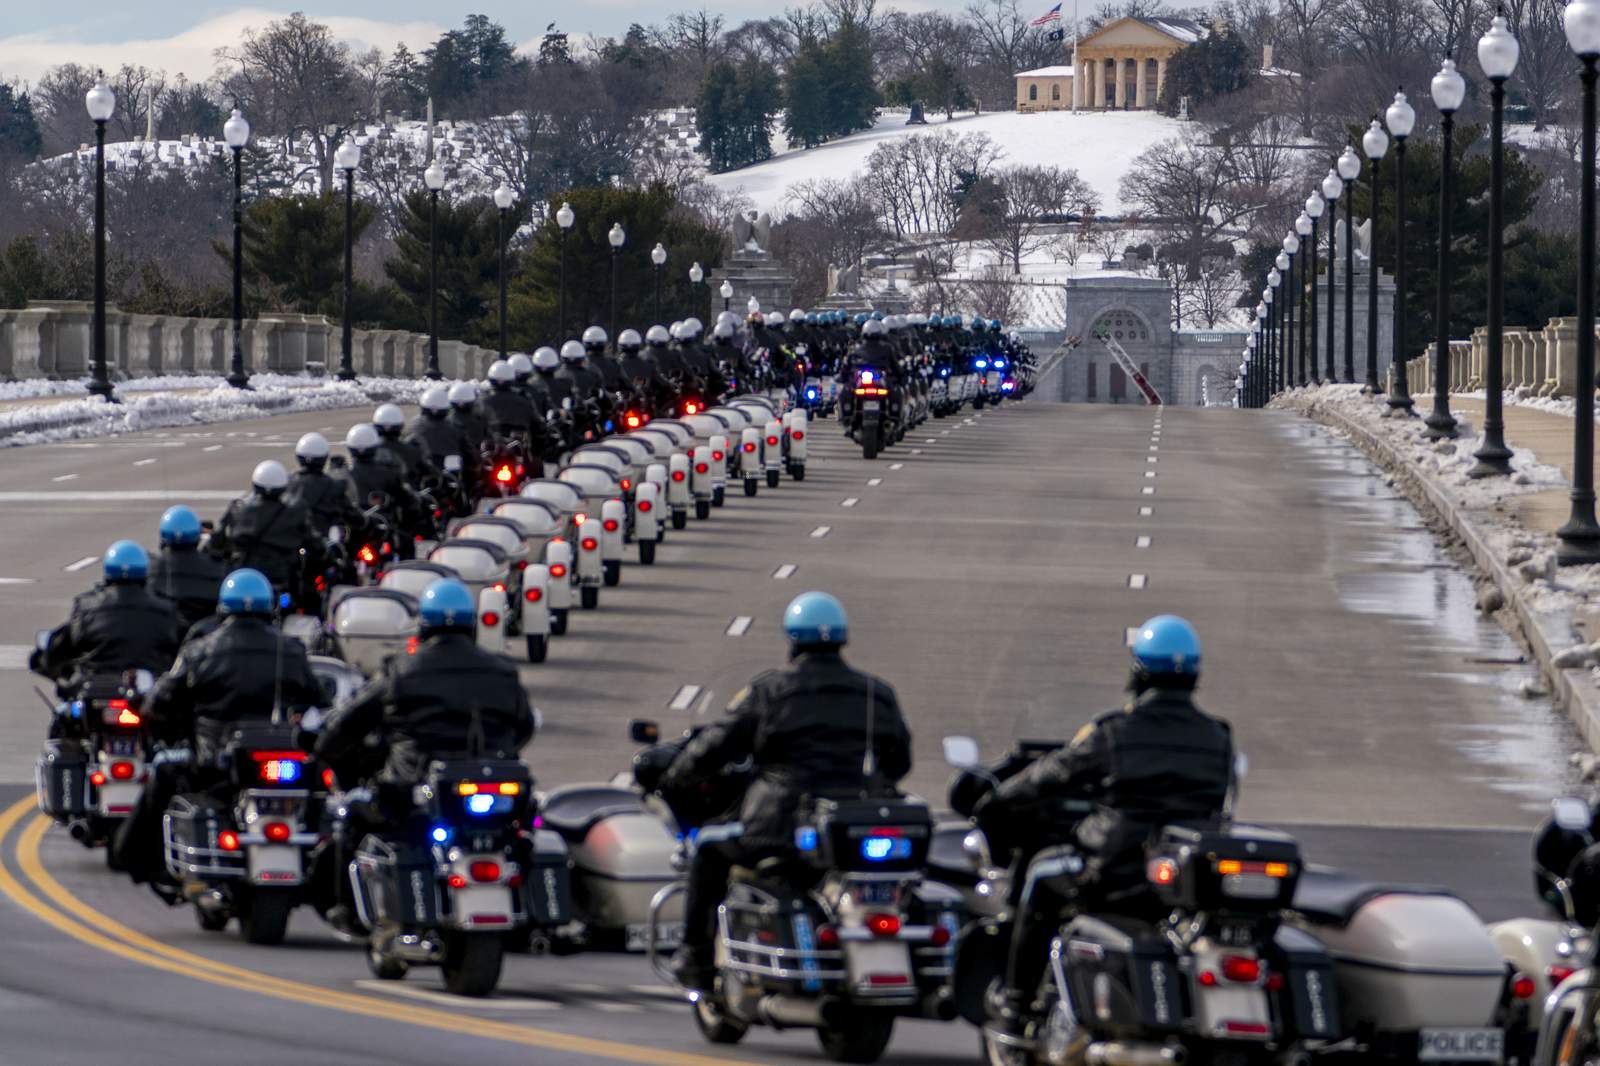 Slain Capitol Police officer honored: 'We will never forget'